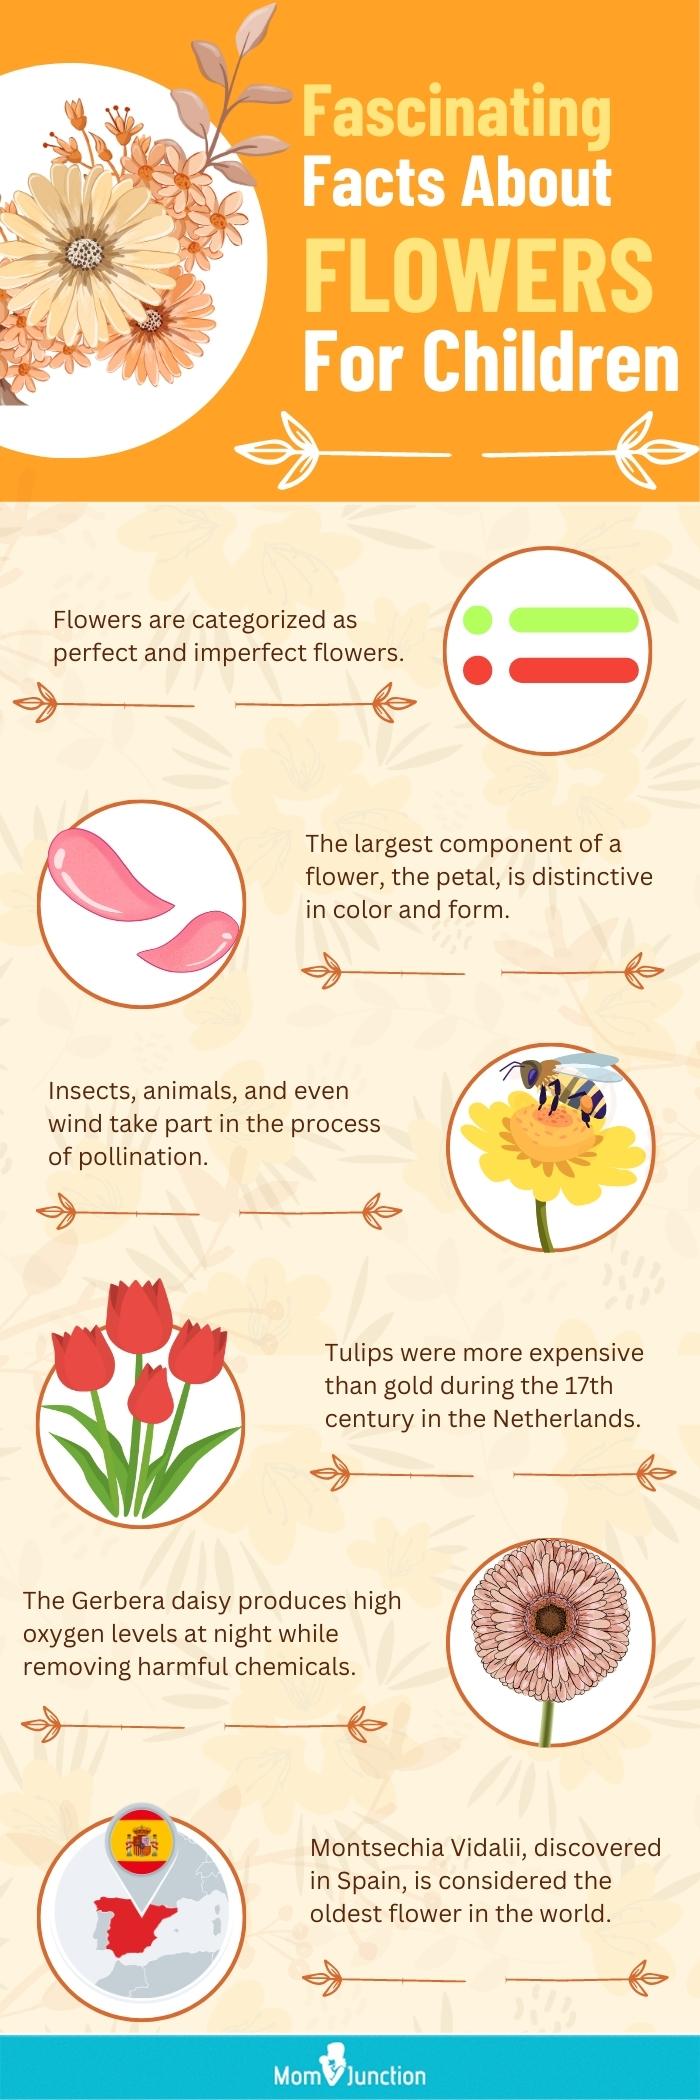 fascinating facts about flowers for children (infographic)